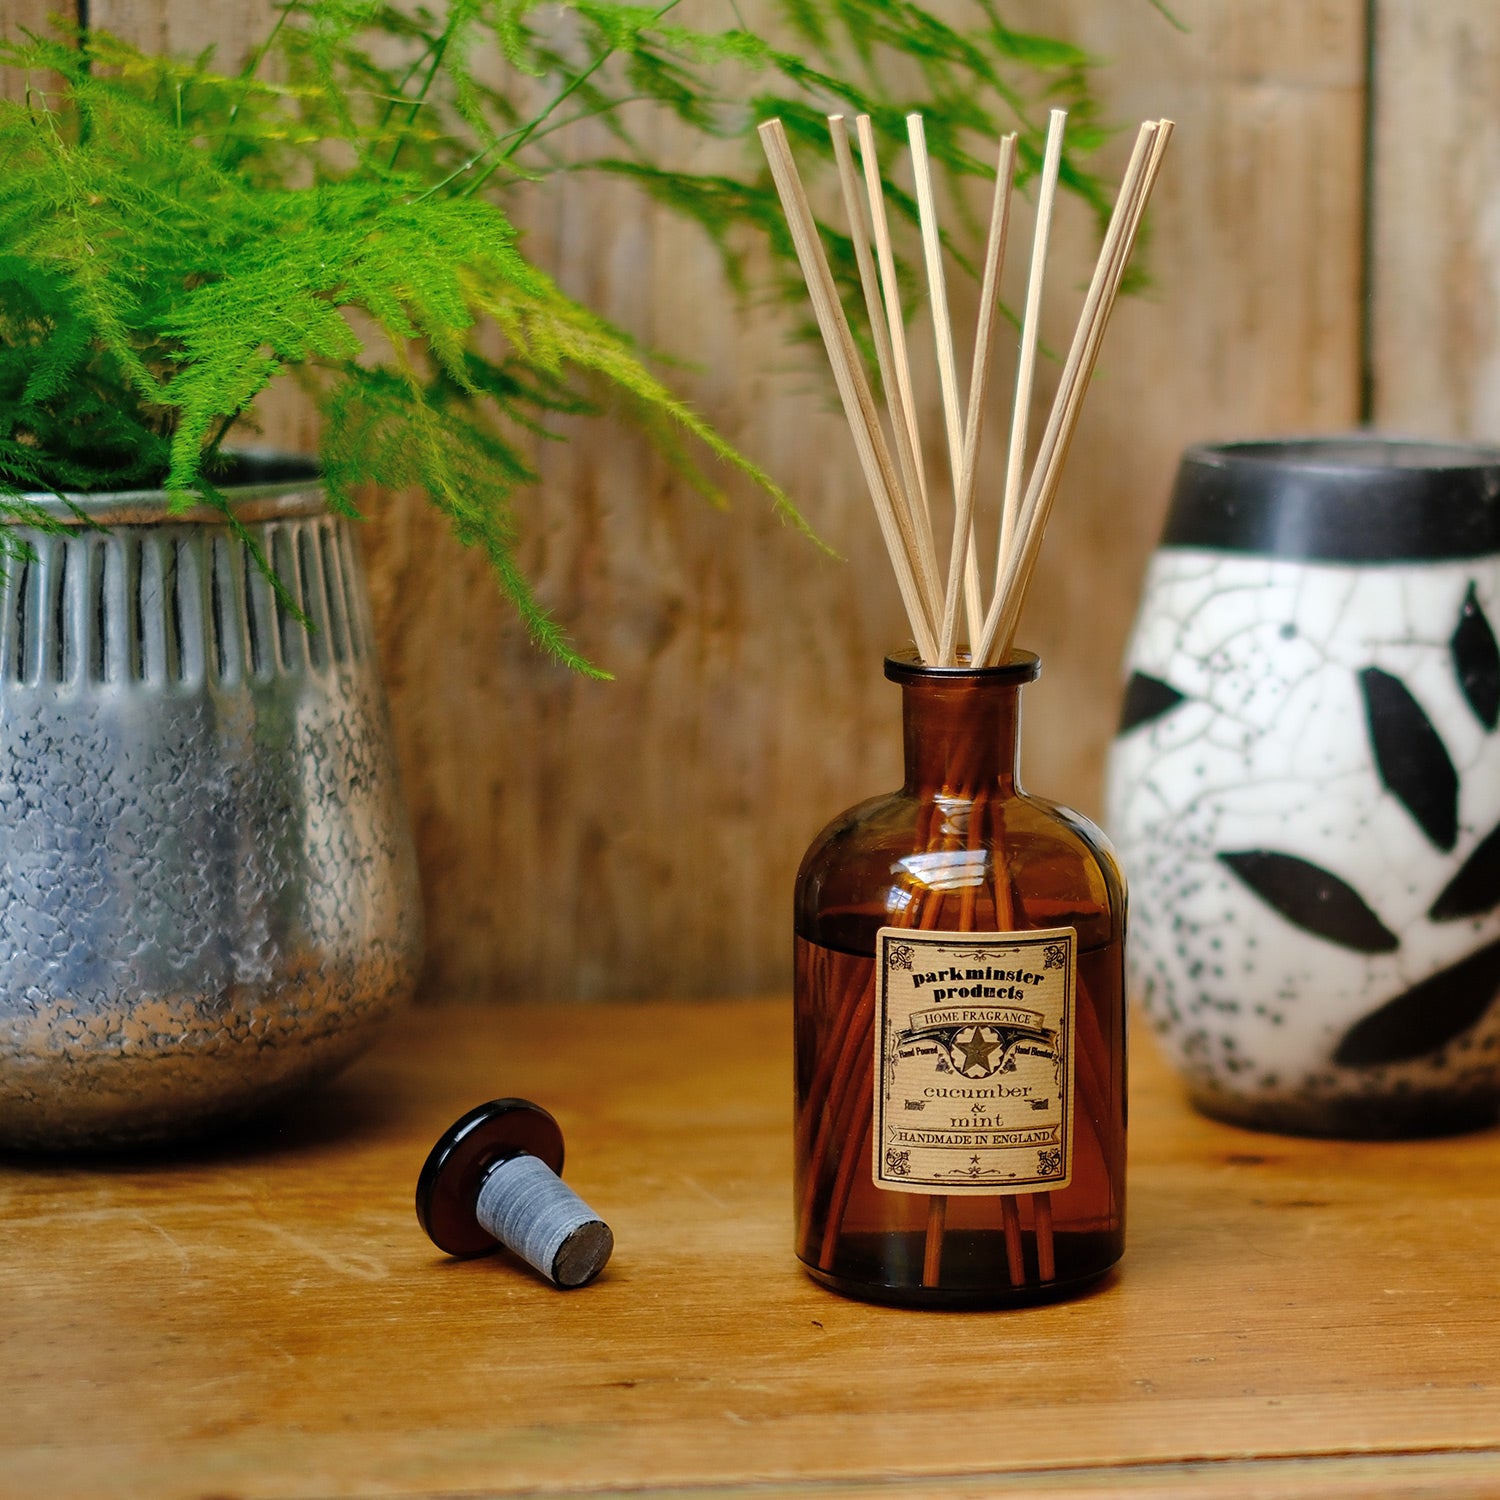 Parkminster Home Fragrance Cucumber & Mint Reed Diffuser, 200ml amber jar, fresh and herby scent, crafted by hand in our Cornwall workshop, Apothecary Collection